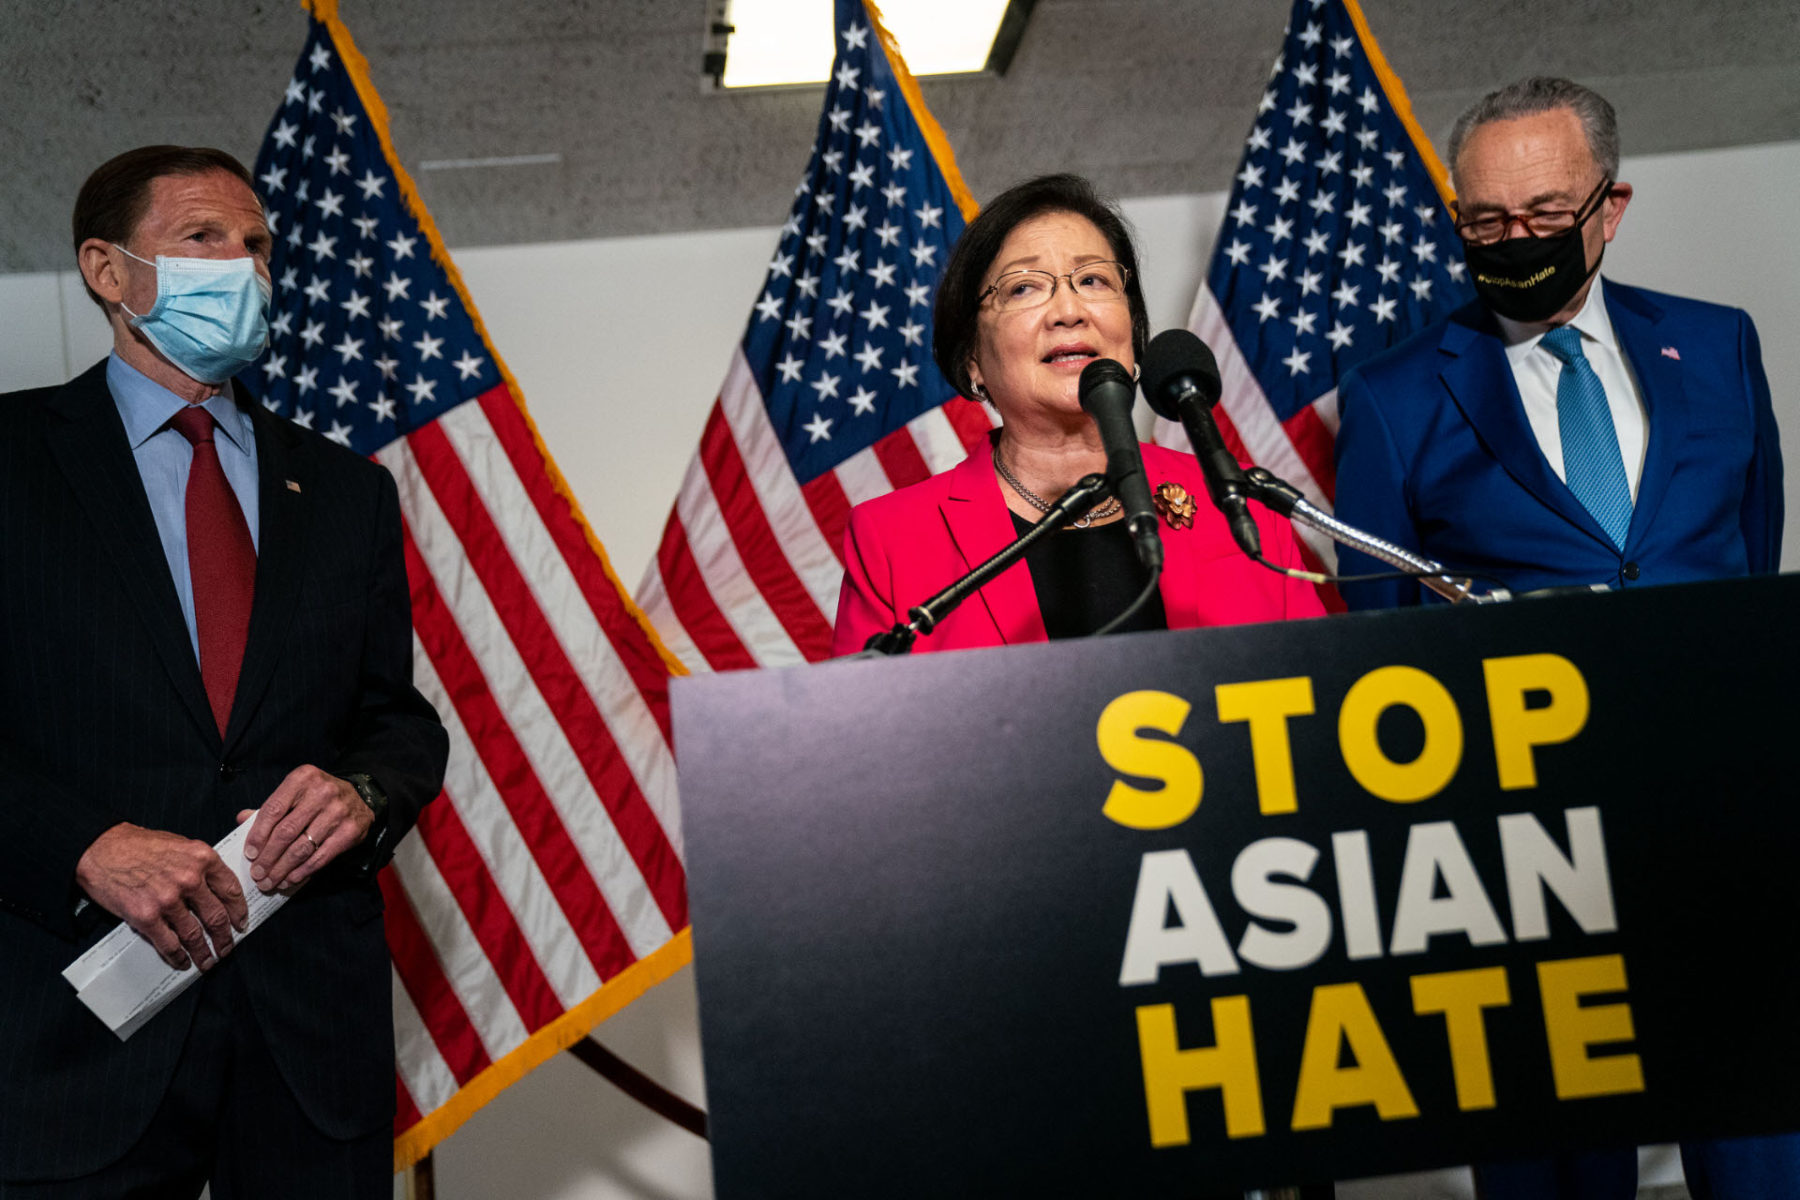 Senate Passes Bill In Response To Wave Of Violence Against Asians 5796